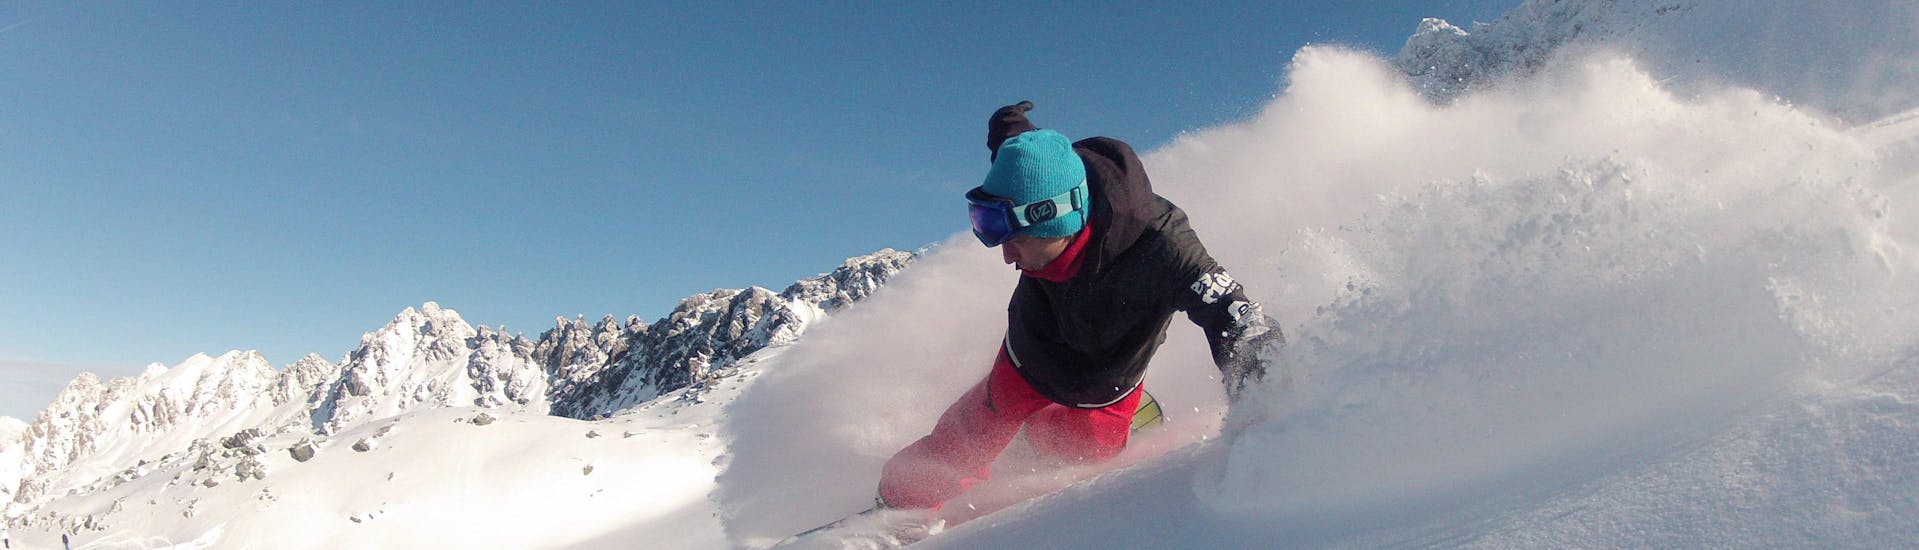 Private Off-Piste Snowboarding Lessons for All Levels.